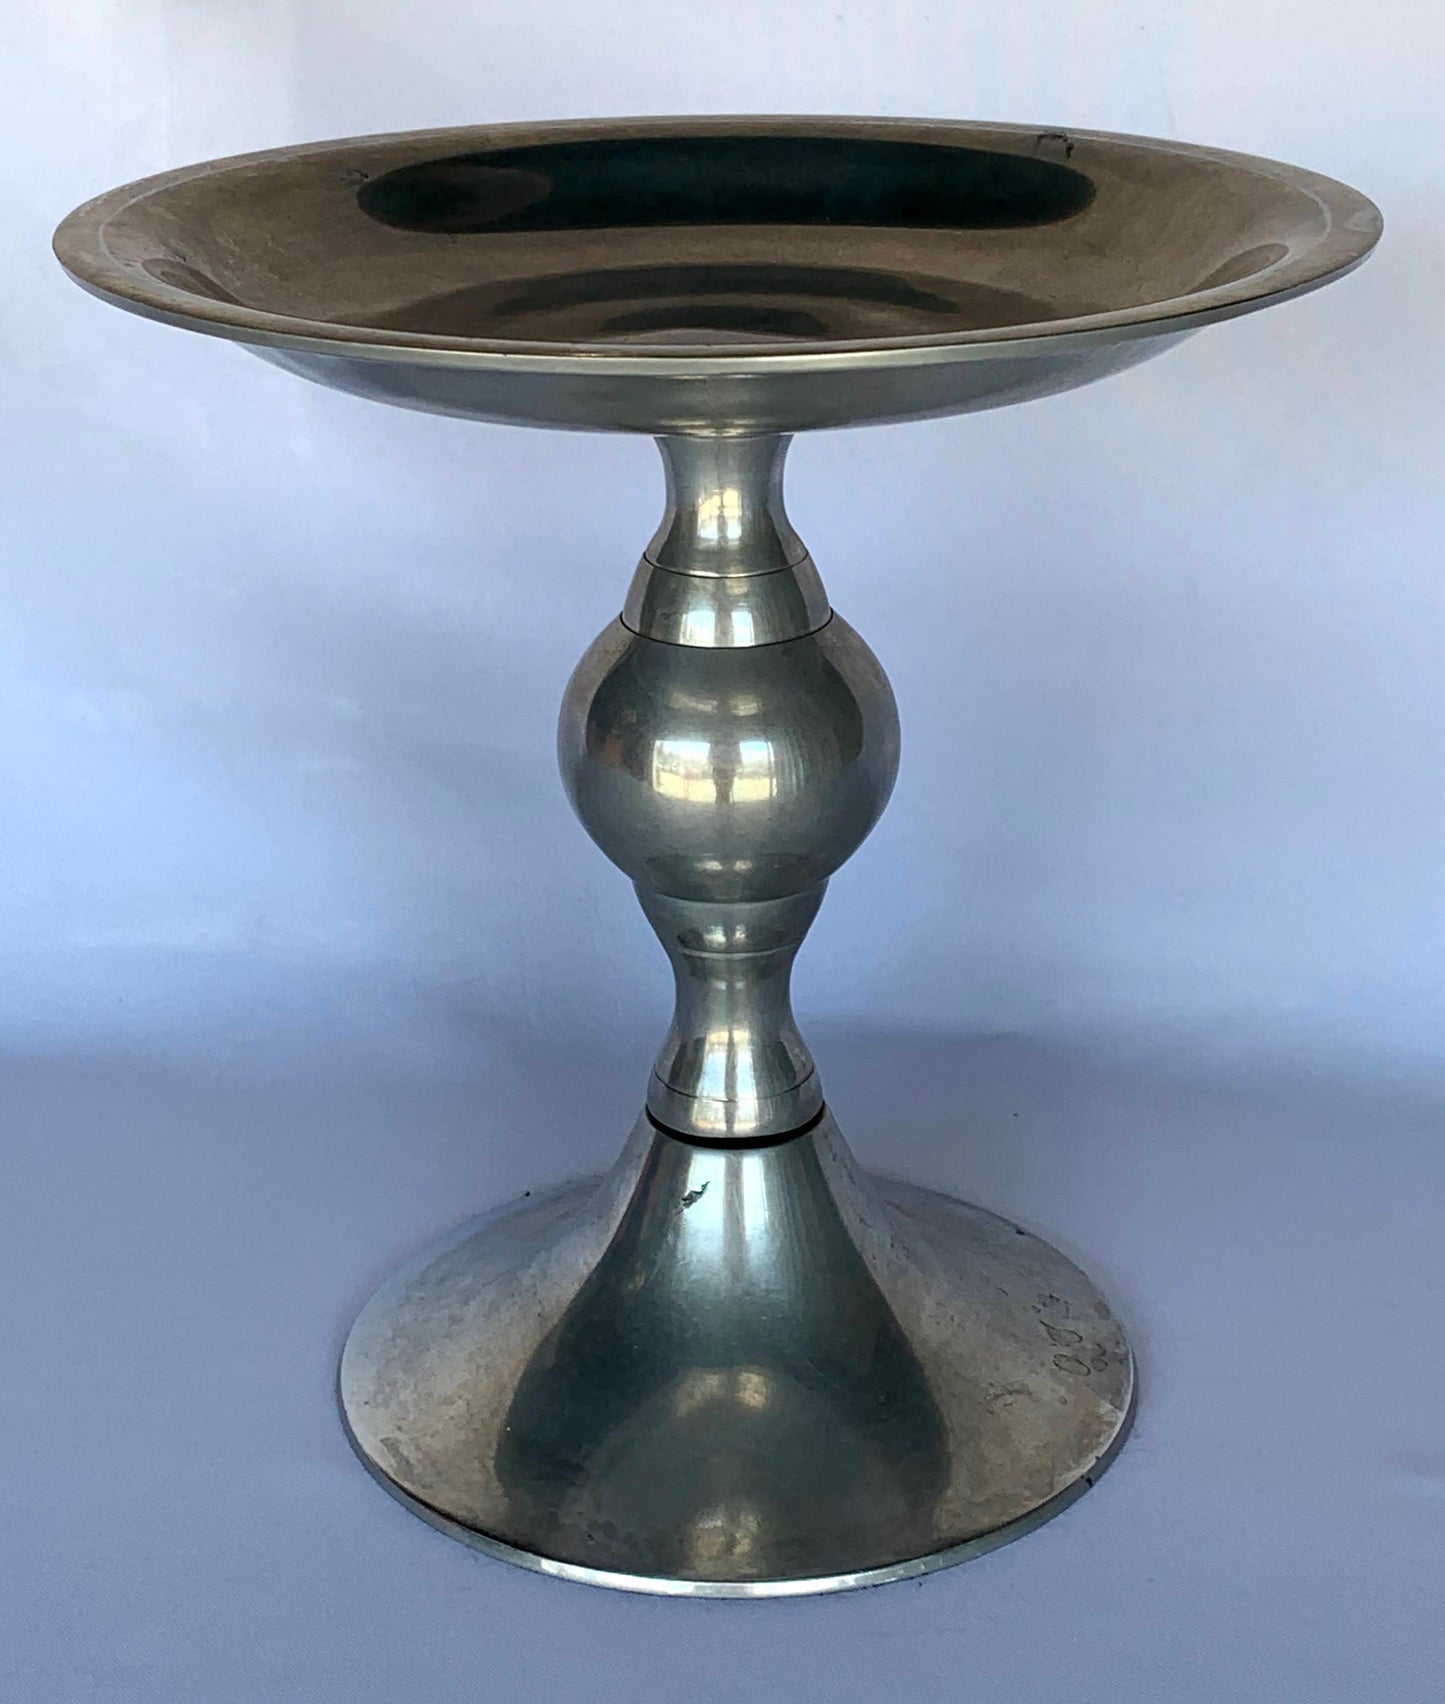 Pedestal Tray Stainless 10"